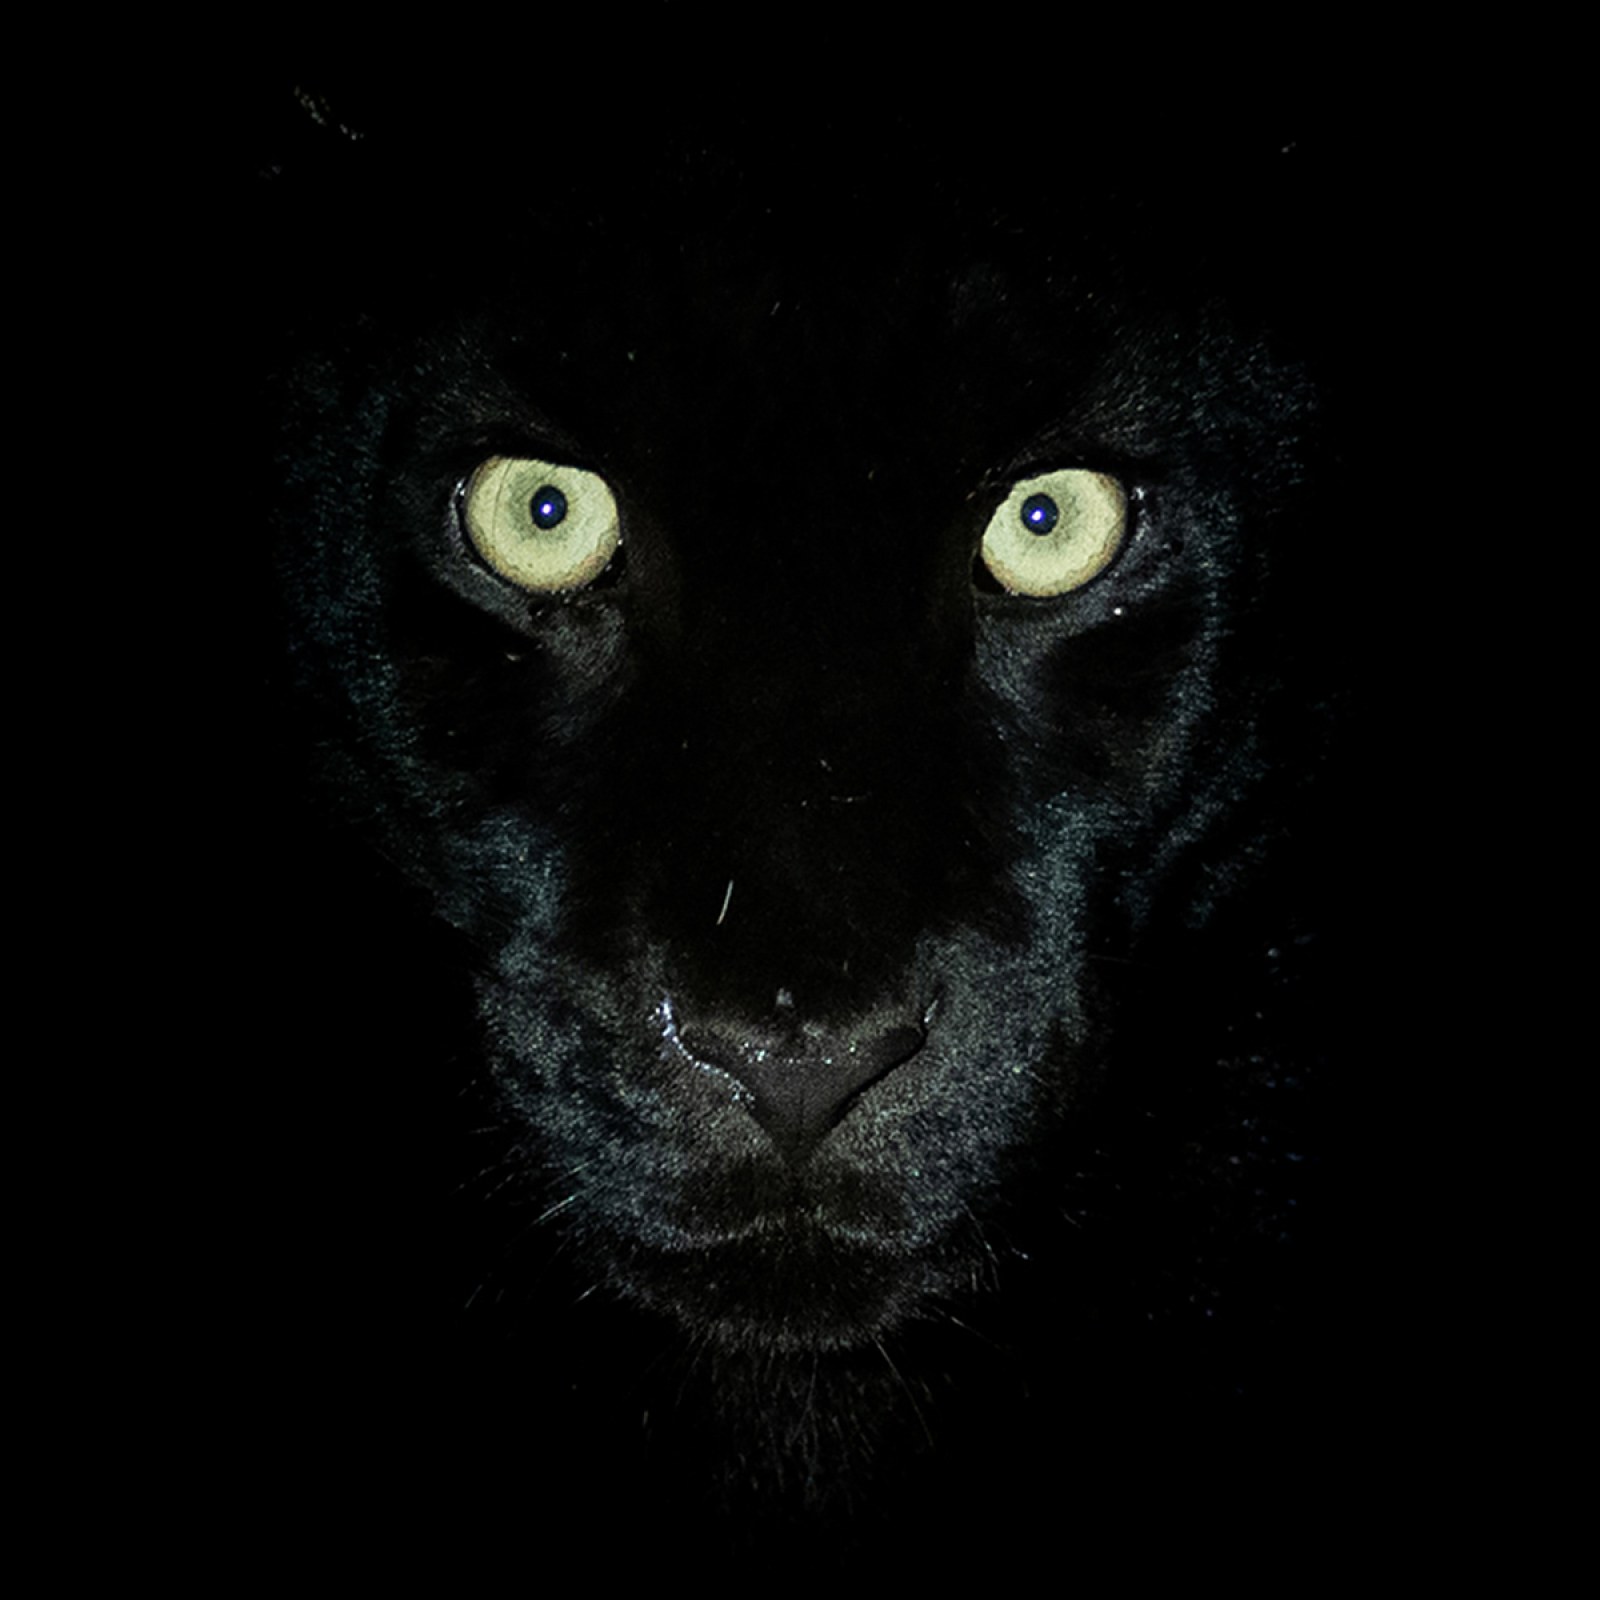 Extraordinary Rare Photo Show Stunning Black Panther in African Wilderness